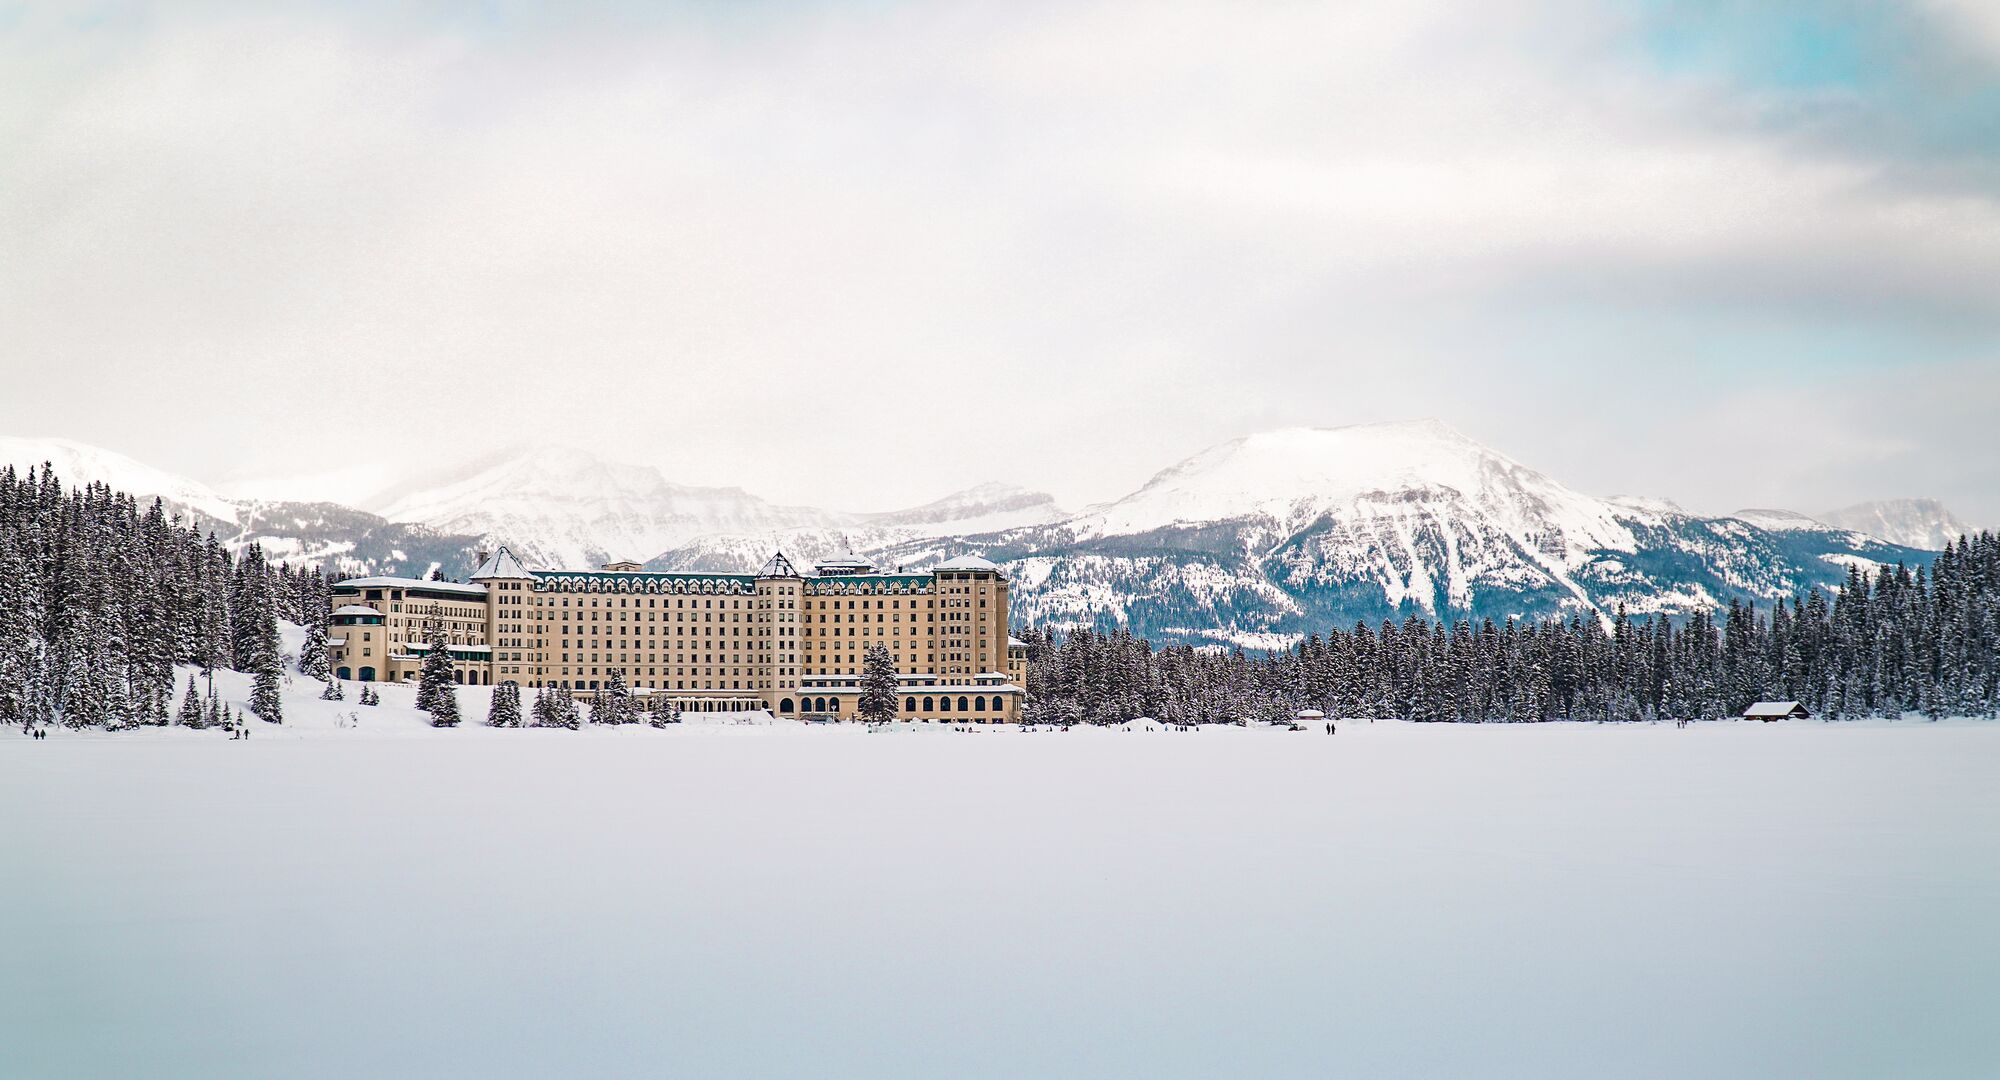 The Fairmont Chateau Lake Louise covered in snow in the winter